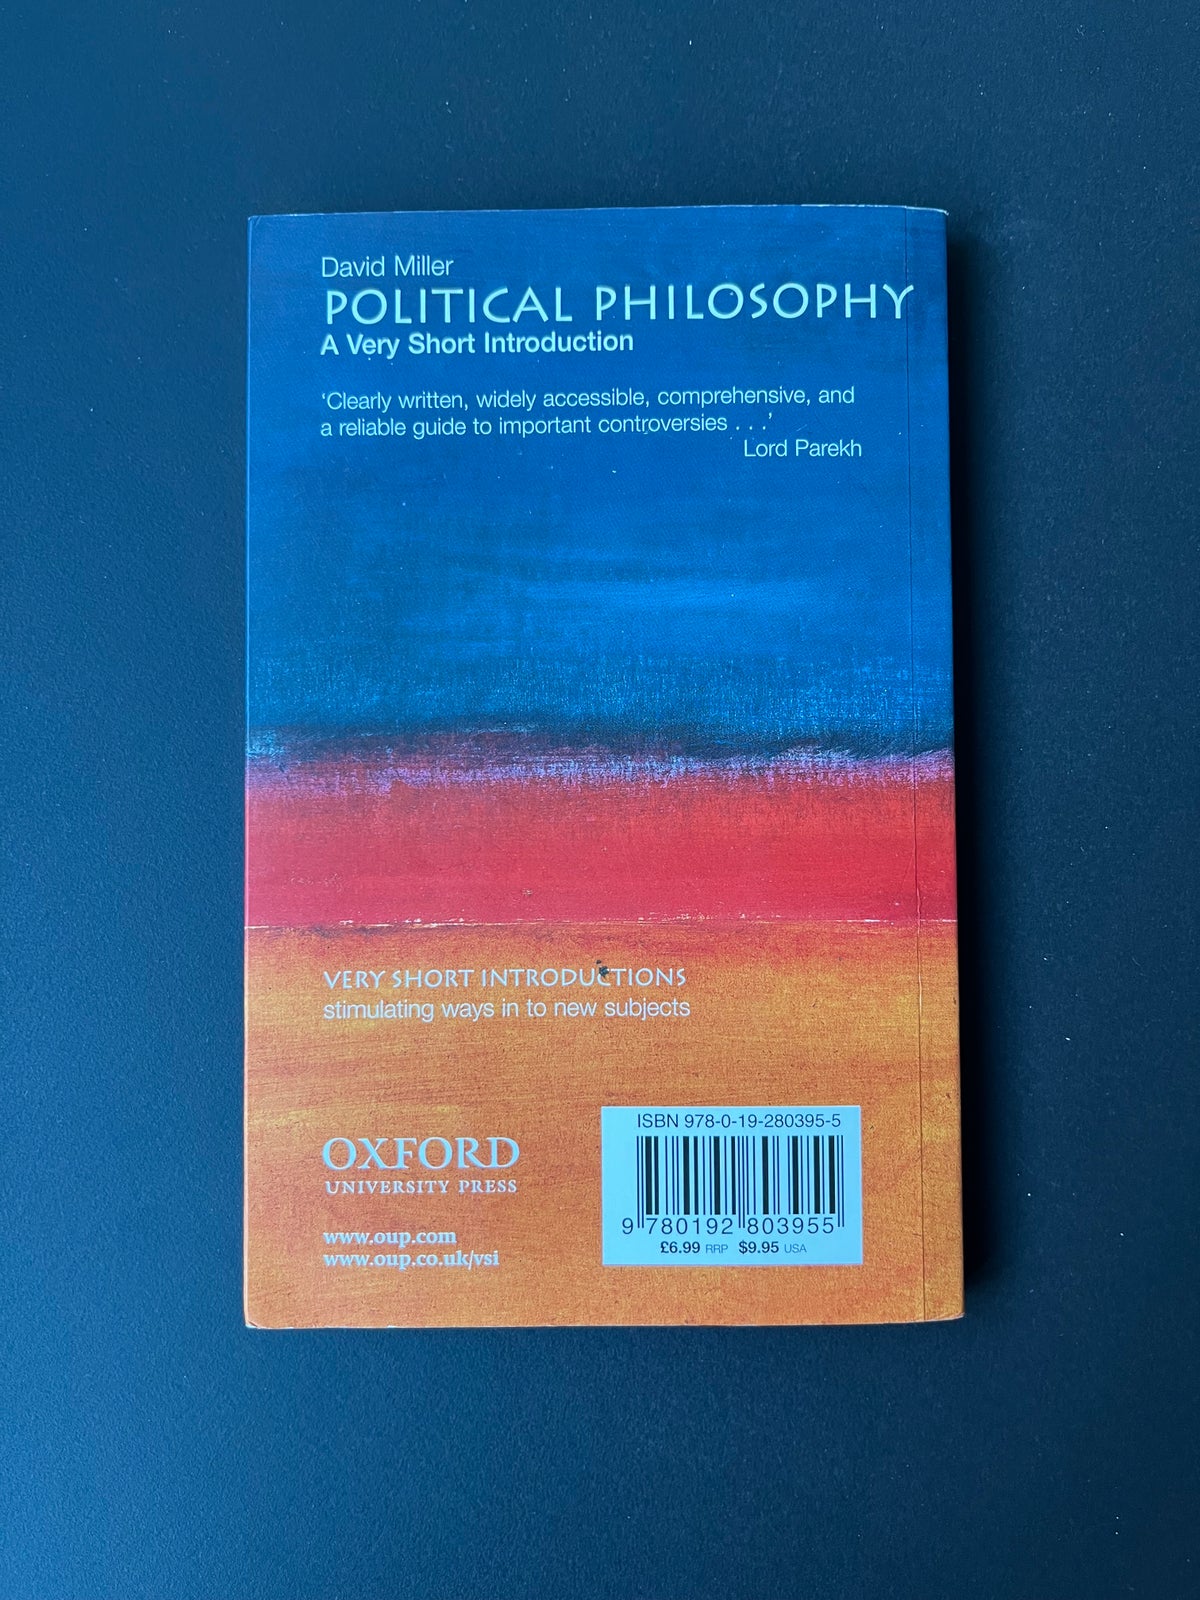 Political philosophy - a very short introduction, David